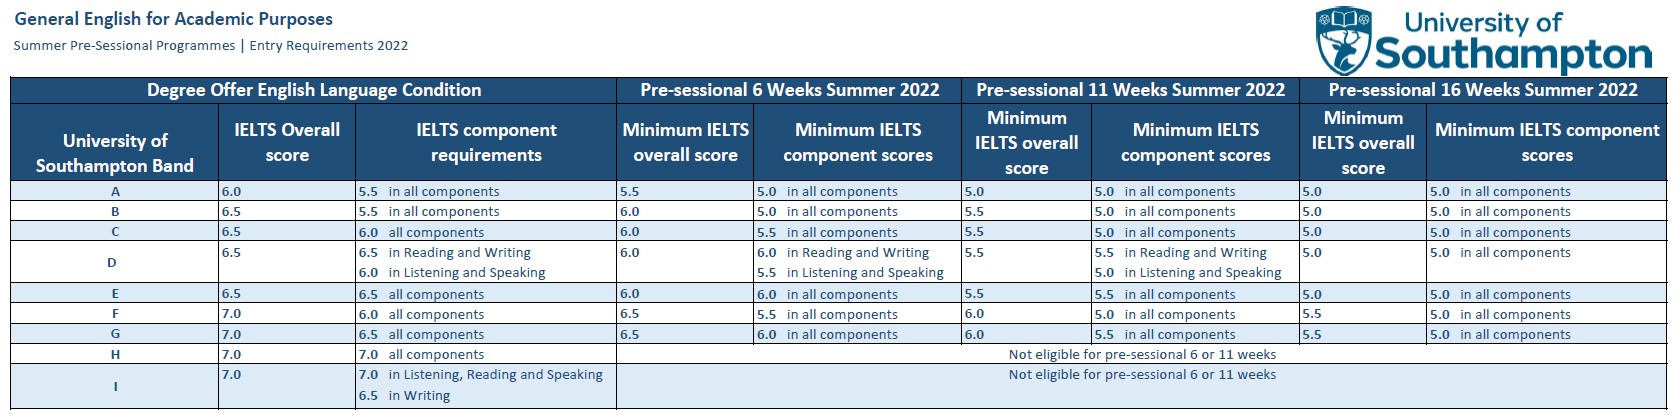 General EAP pre-sessional summer entry requirements